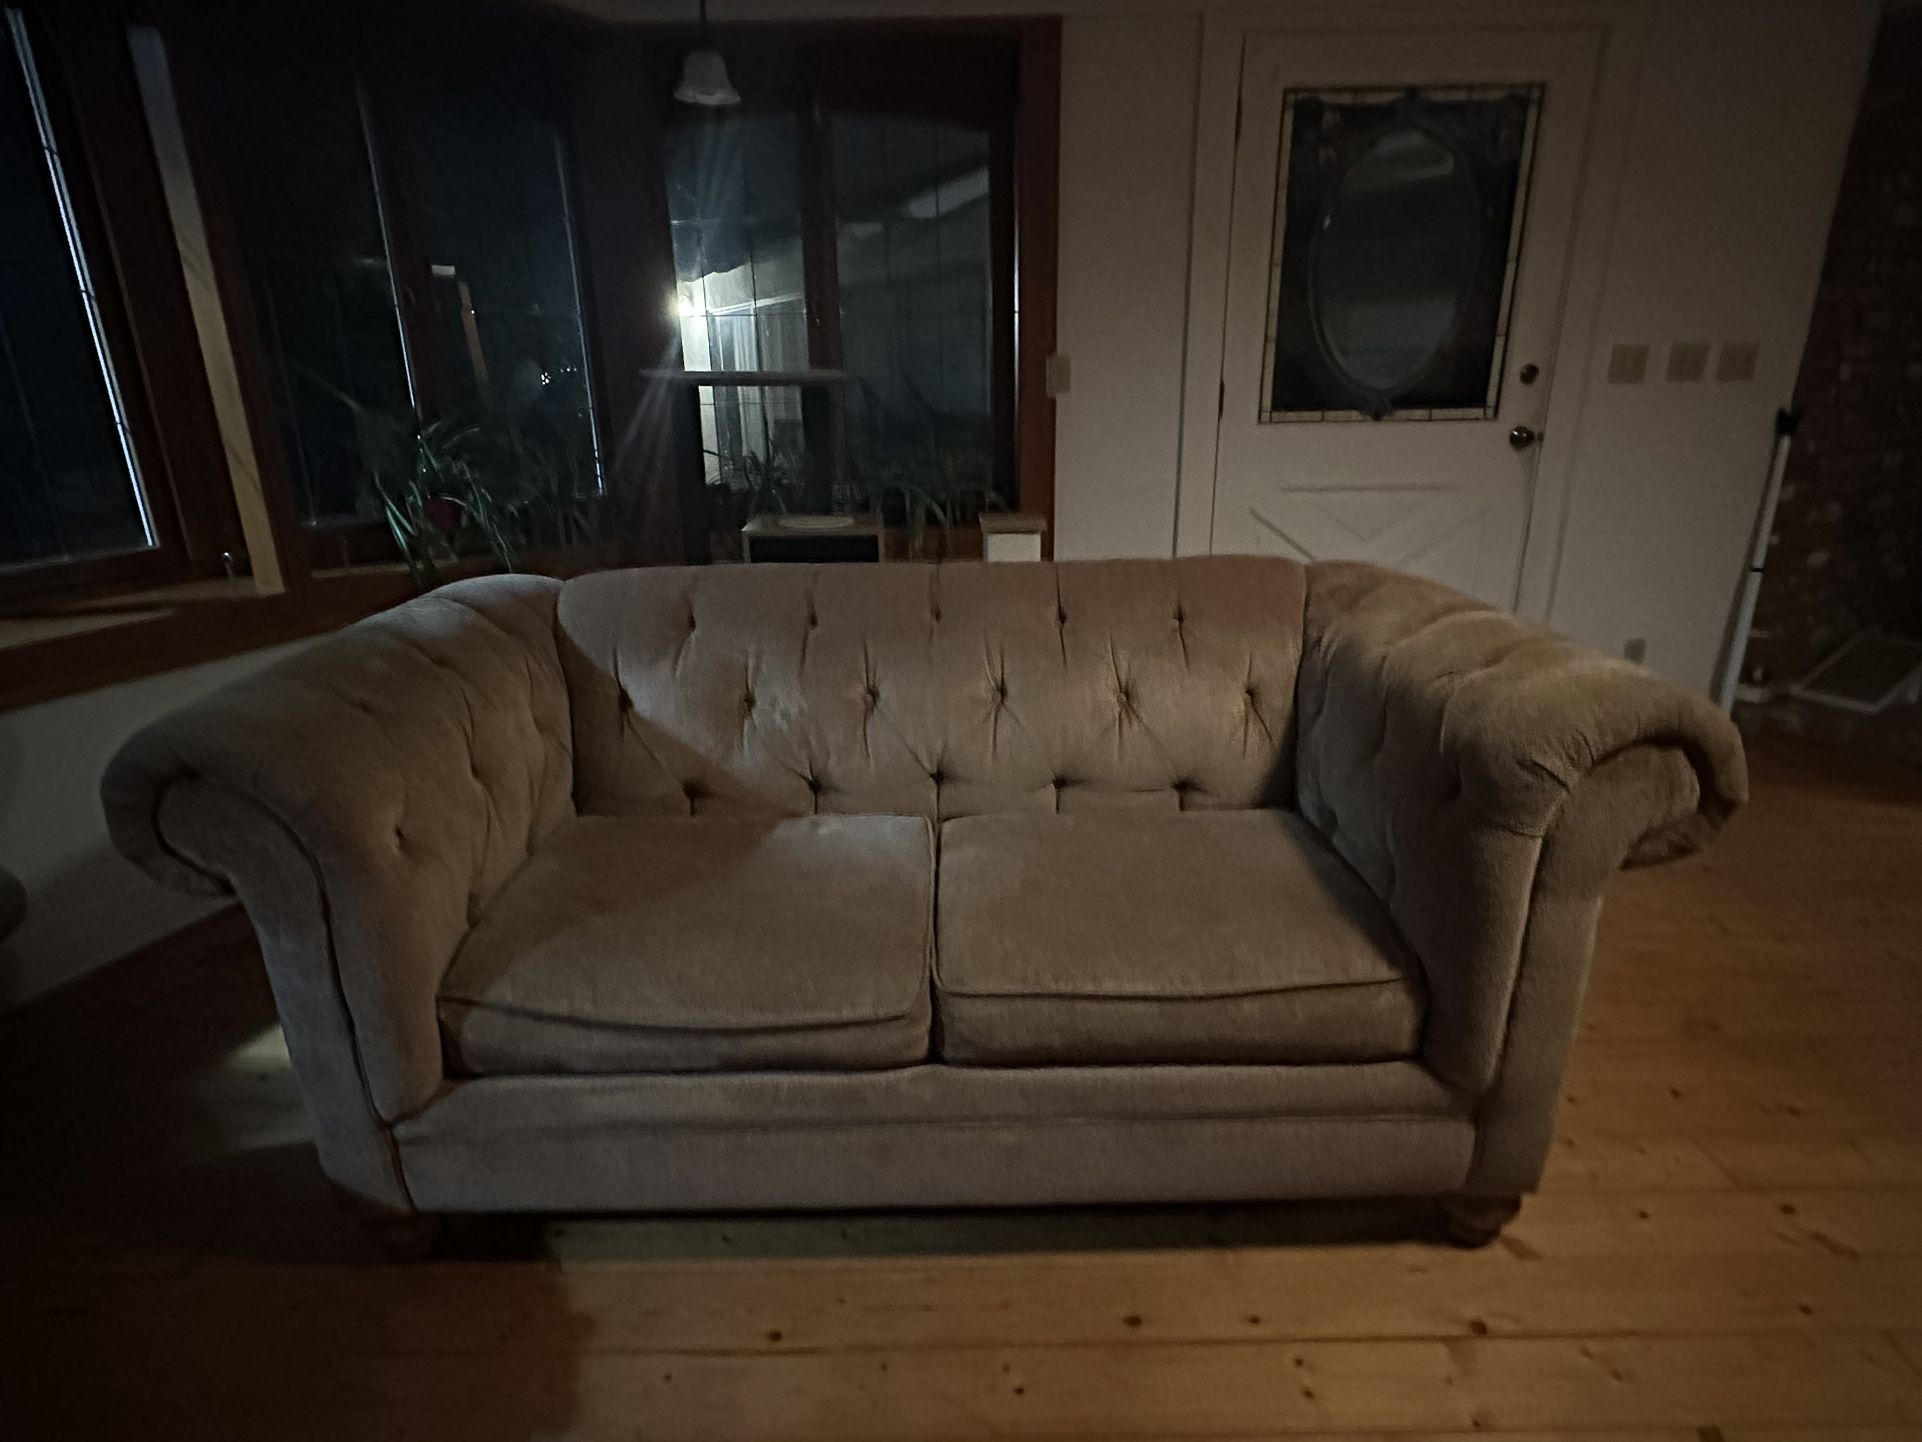 Loveseat/Couch